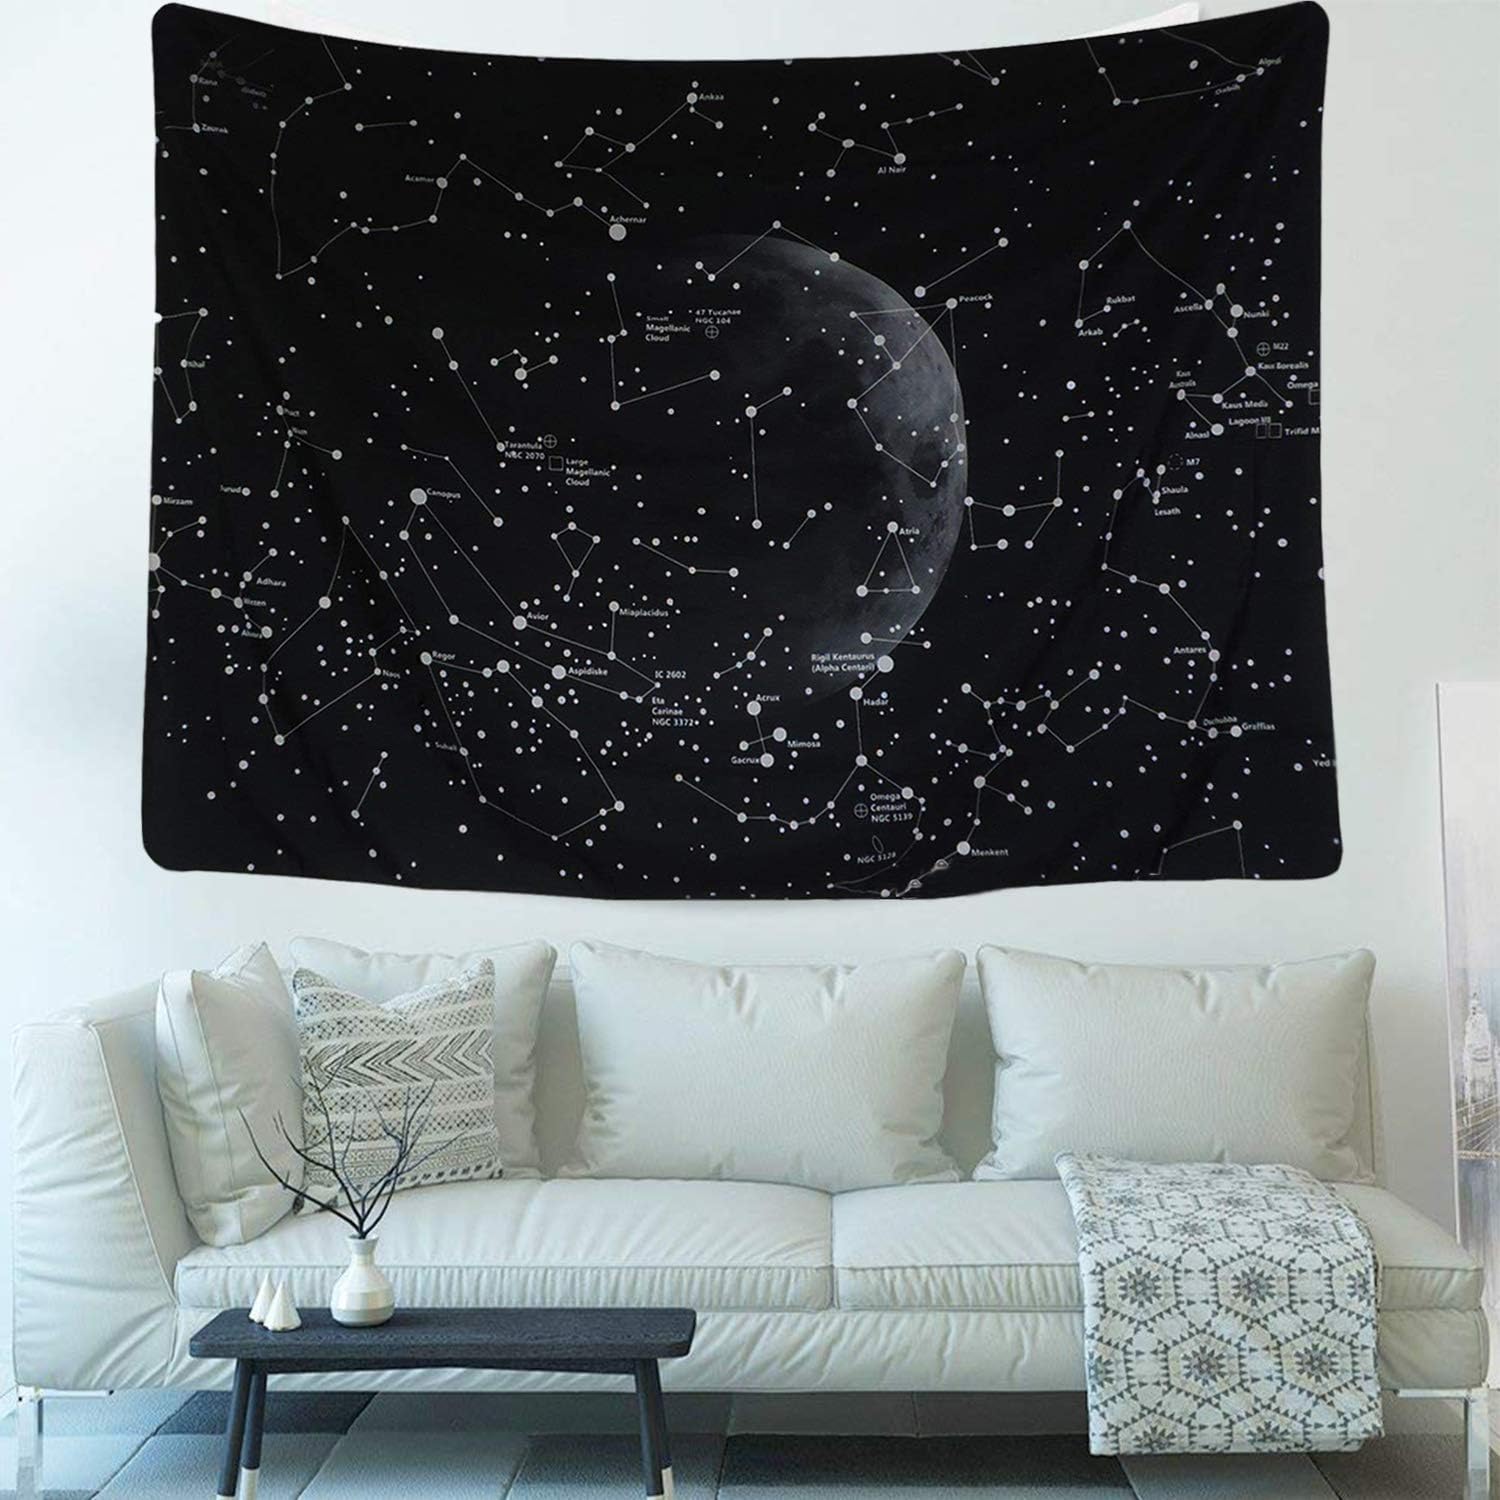 Tapestry Wall Hanging Tapestries Wall Blanket Wall Art Wall Decor Astrology Galaxy Starry Night Sky Bohemian Beach Indian Wall Decor for Bedroom Living Room Dorm(59.1 x 51.2, Moon Constellations)